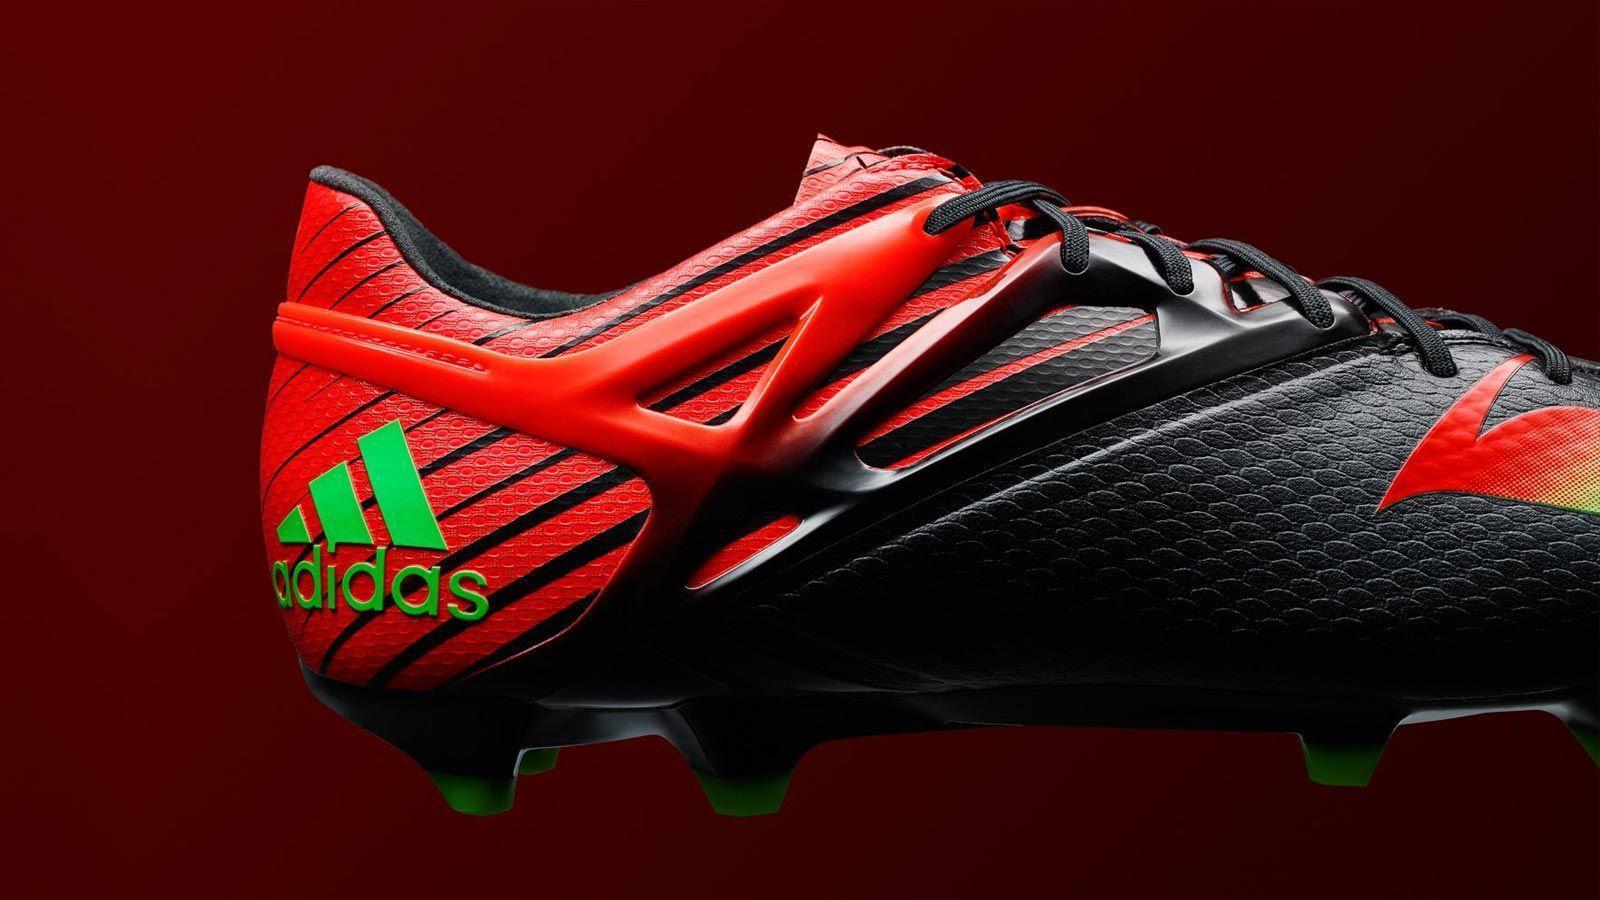 The new black / red Adidas Messi 2015